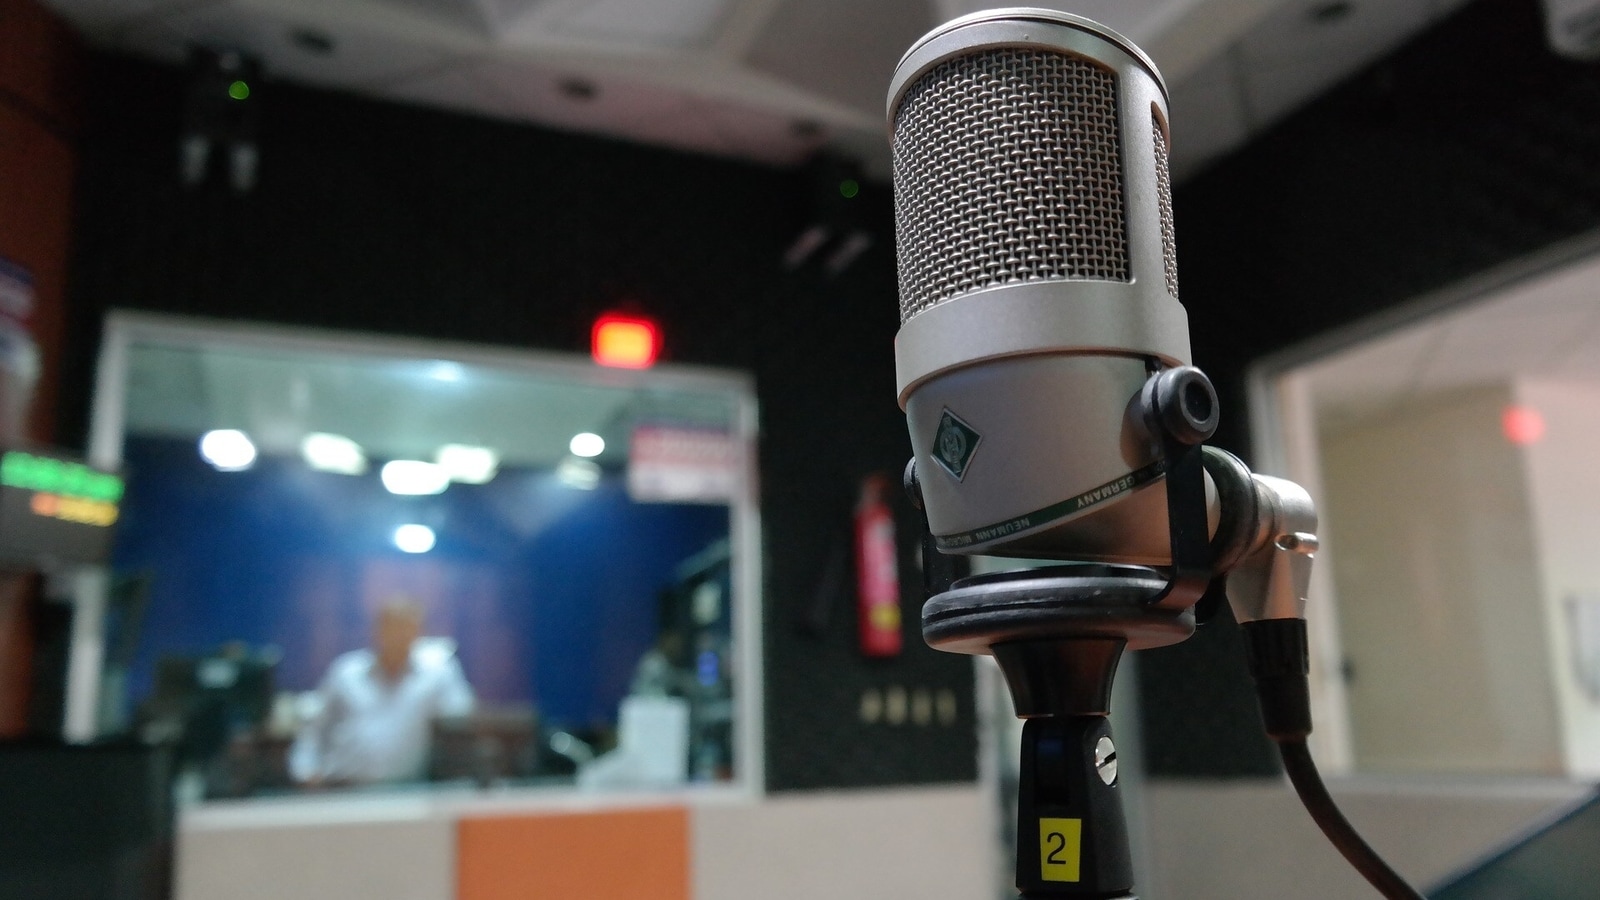 View: HD Radio broadcasting is primed to lead India's digital